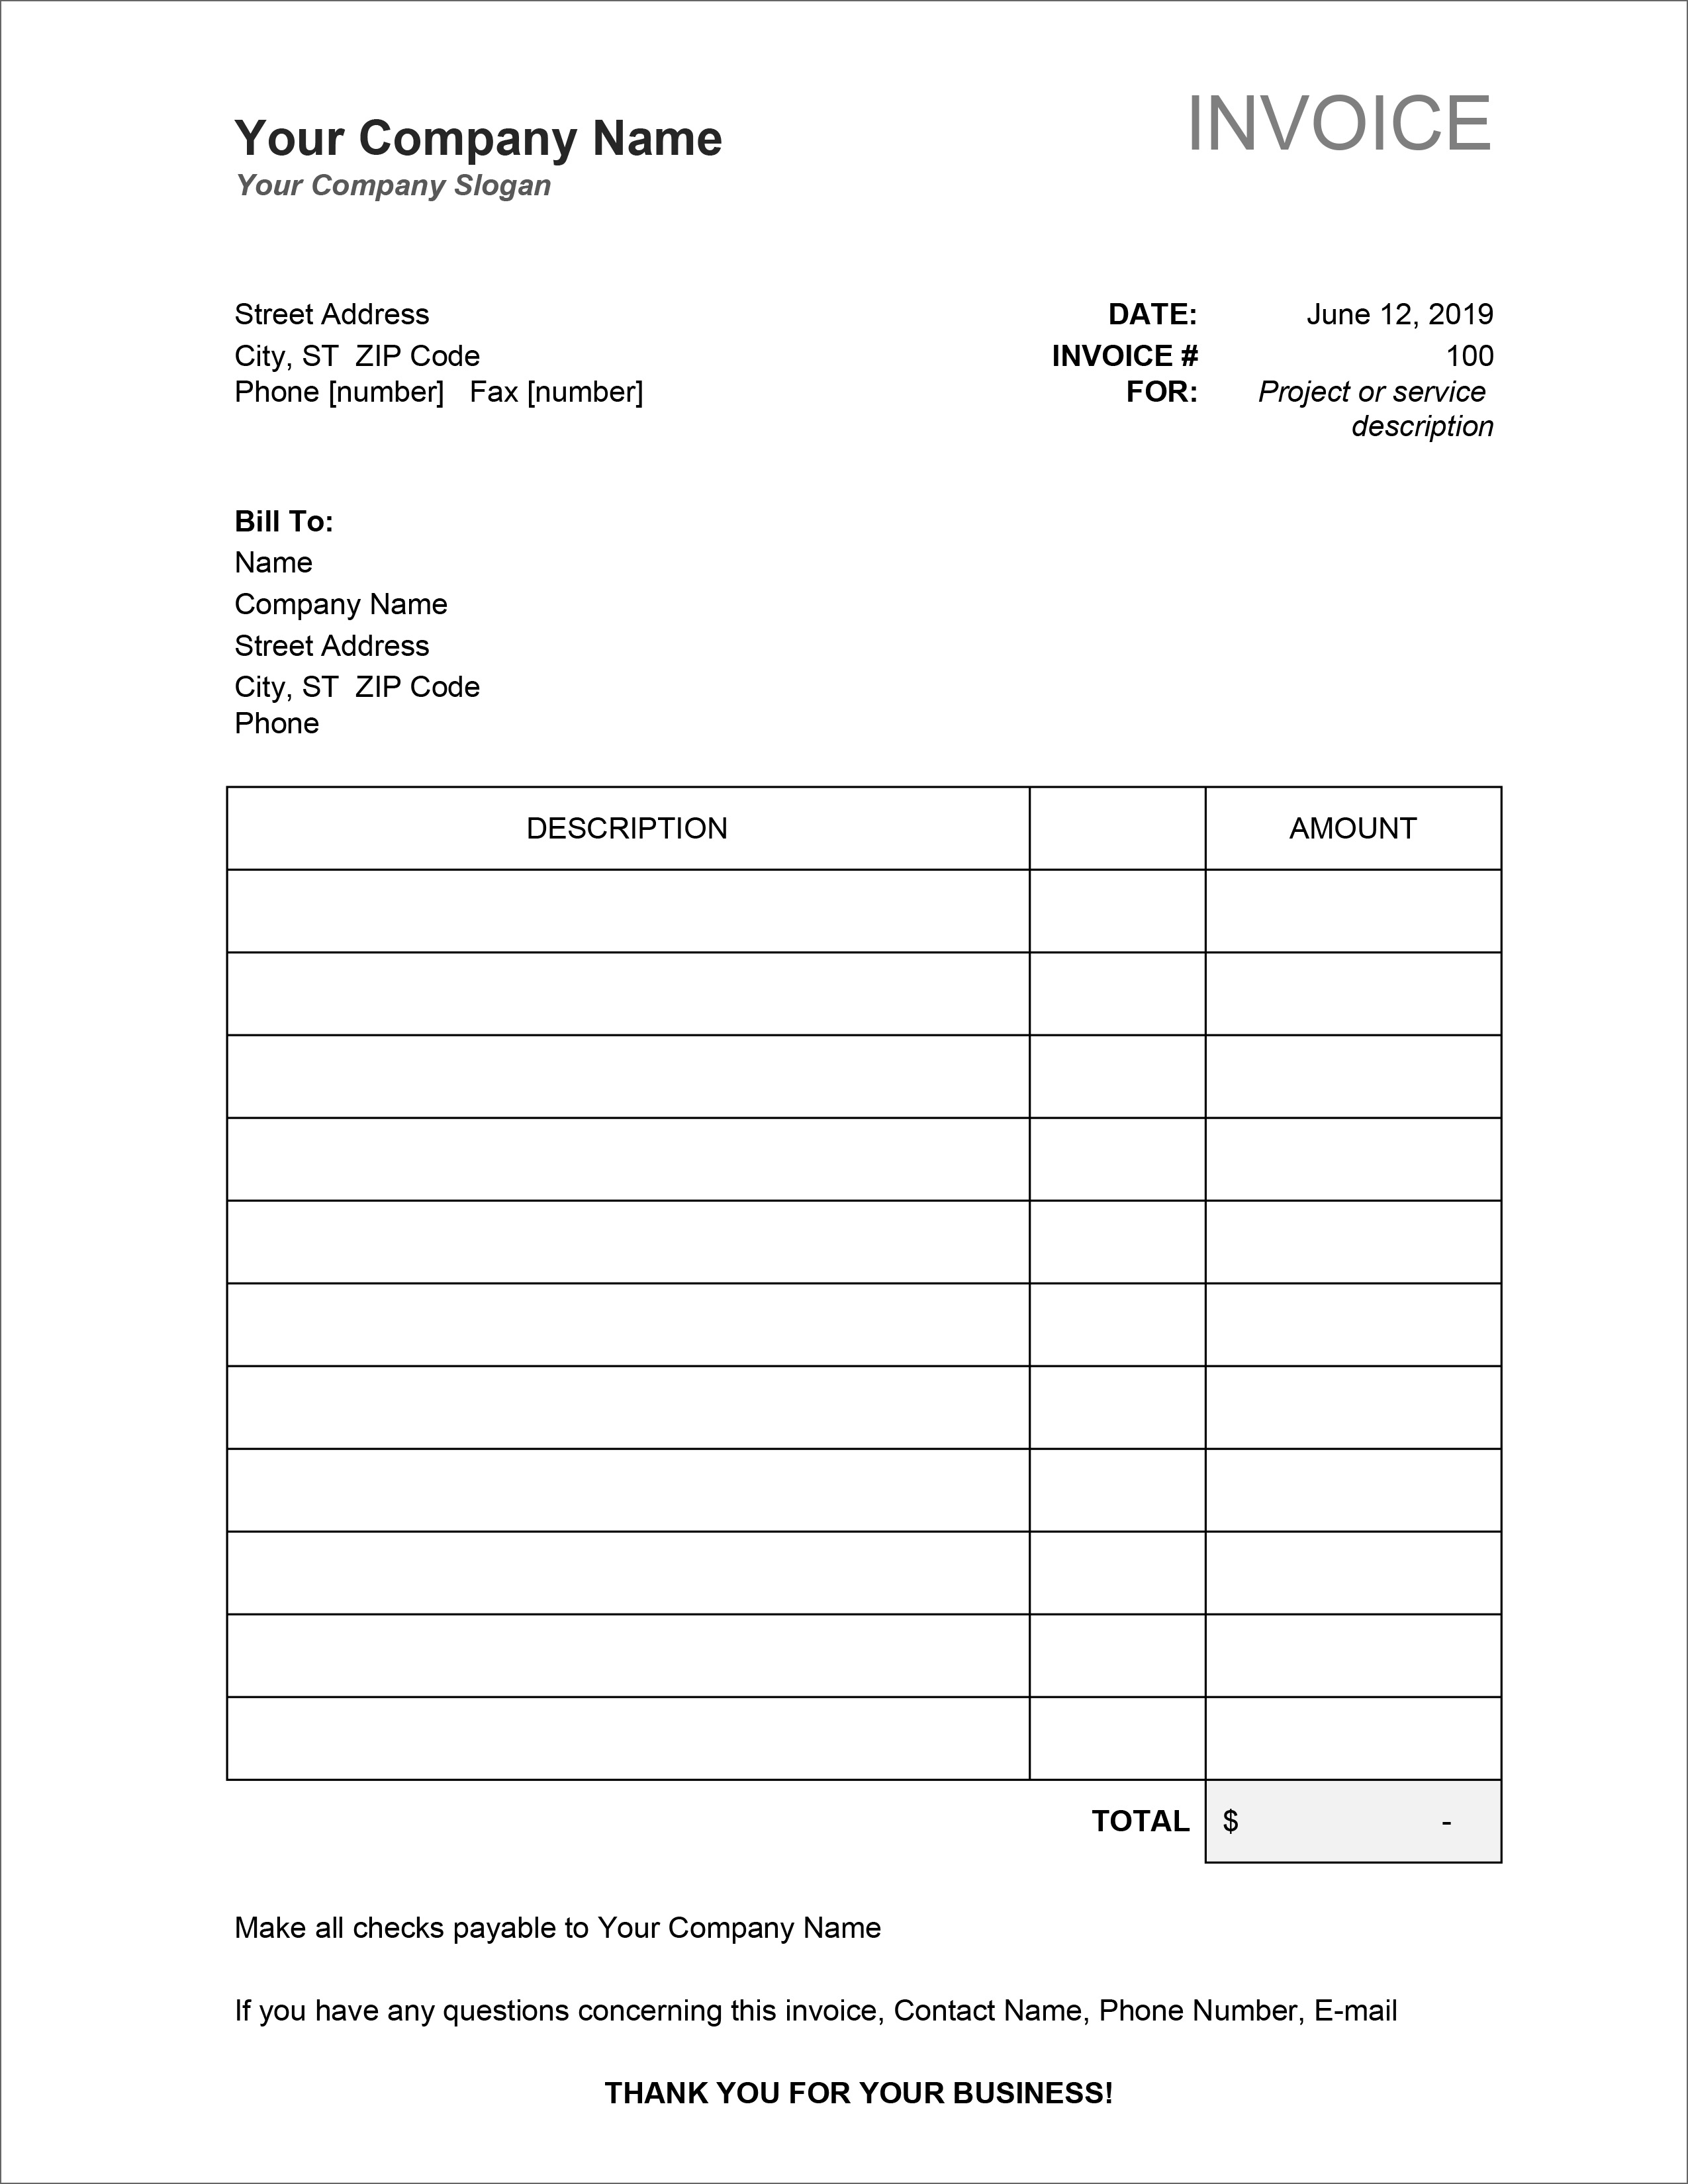 32 free invoice templates in microsoft excel and docx formats sample invoice template free download